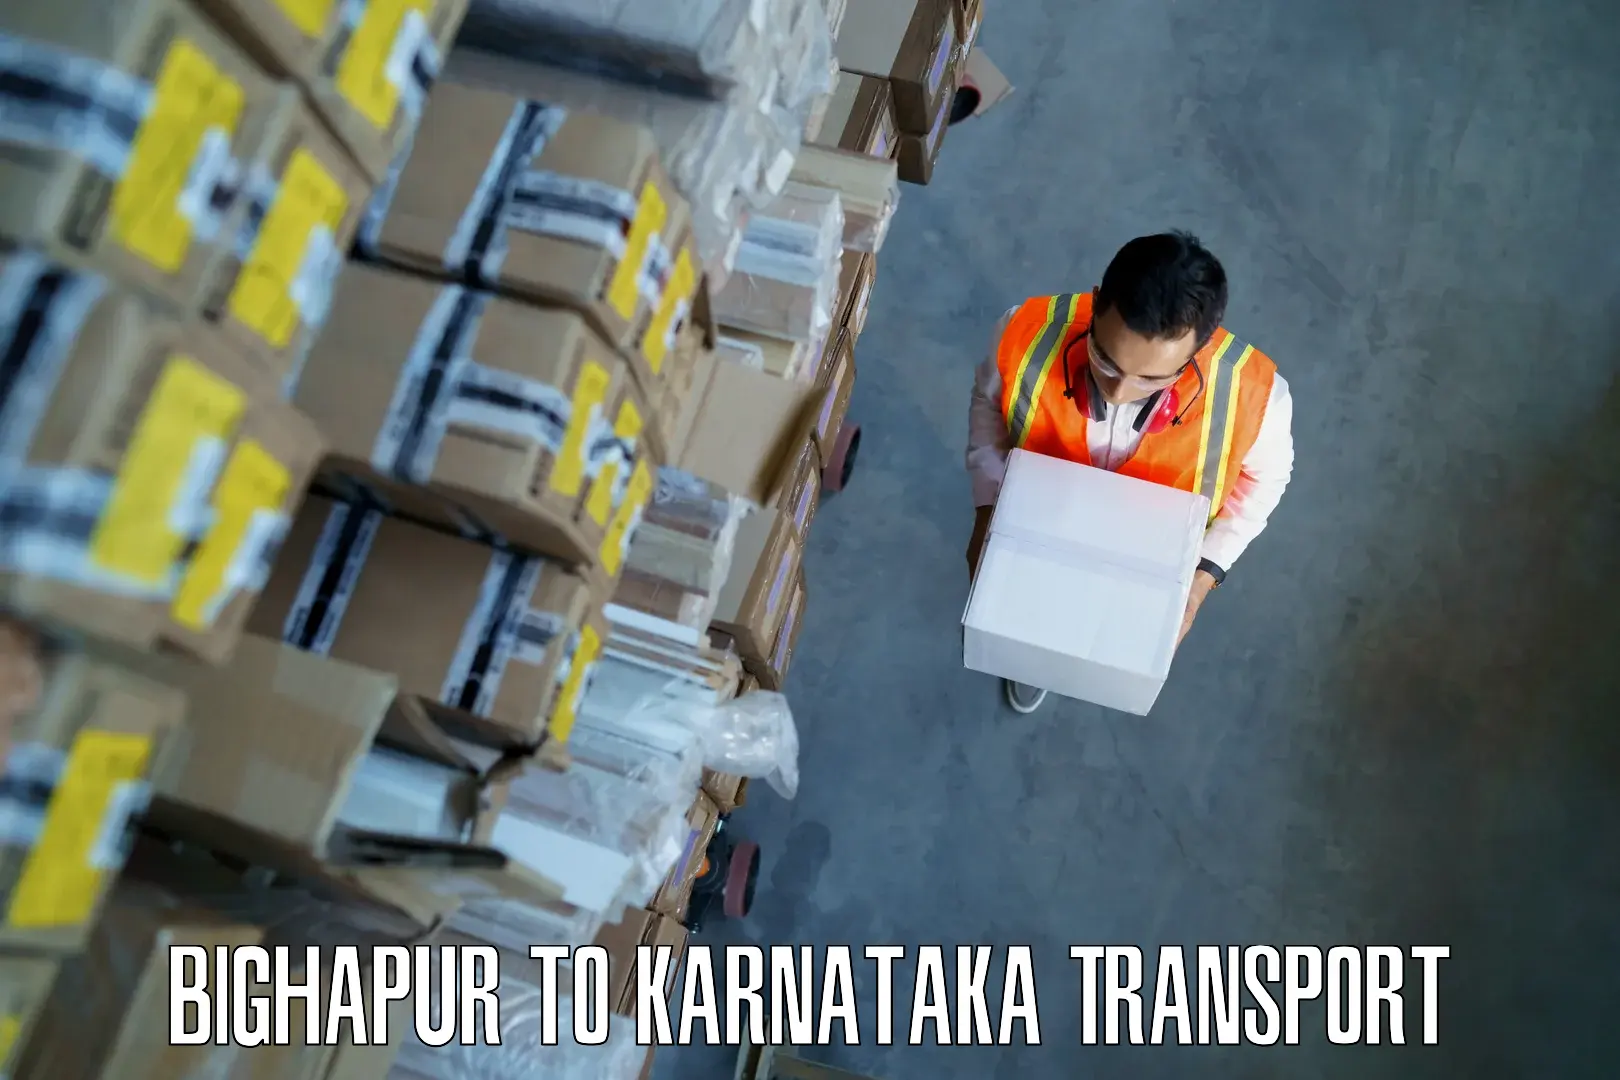 Goods delivery service Bighapur to Bhatkal